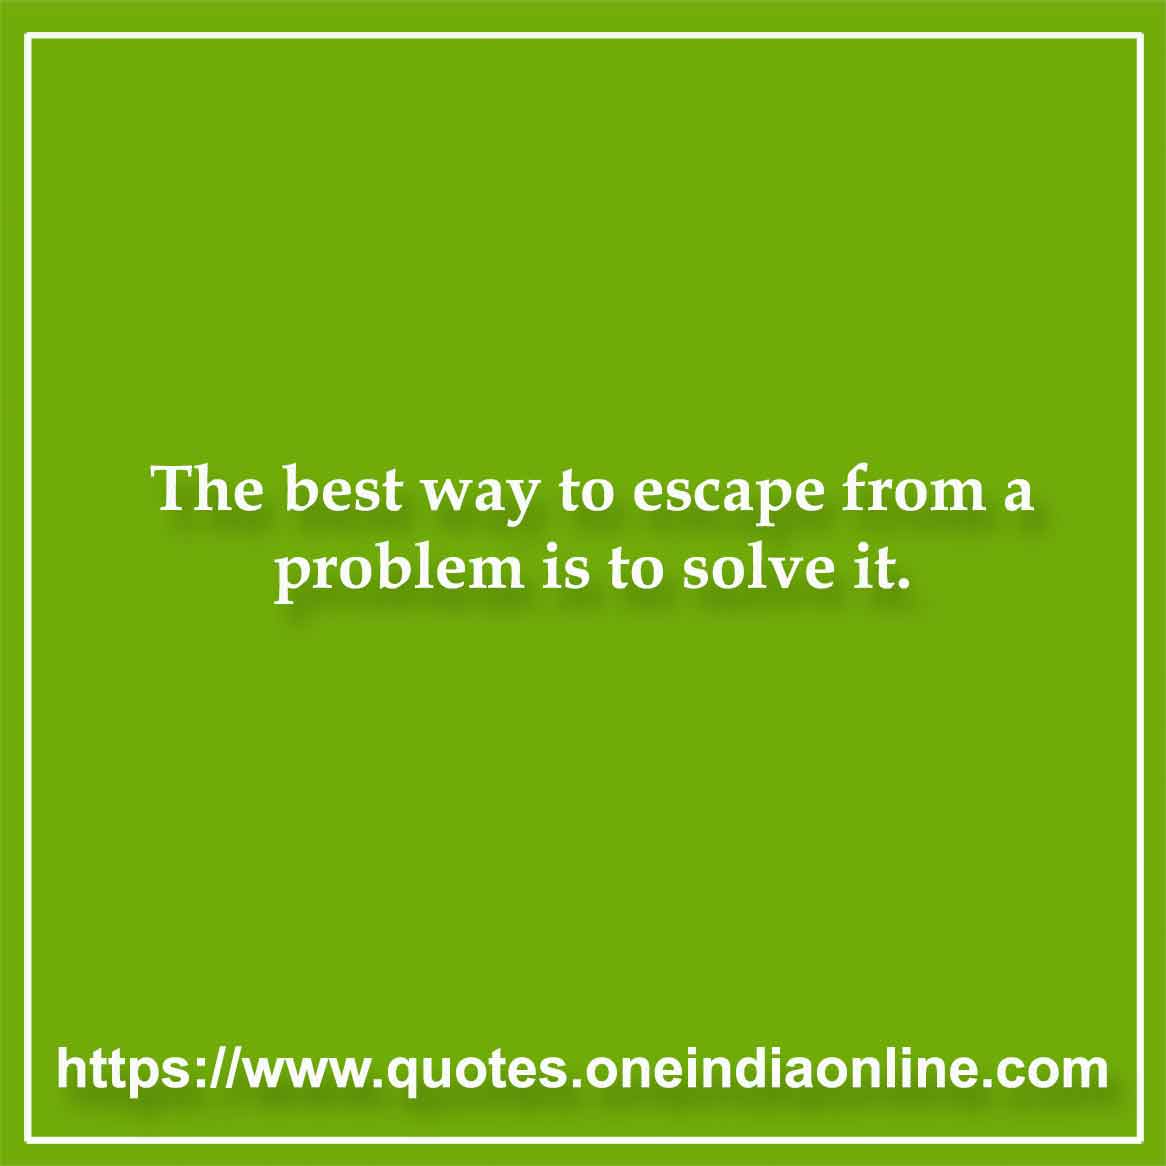 The best way to escape from a problem is to solve it. 